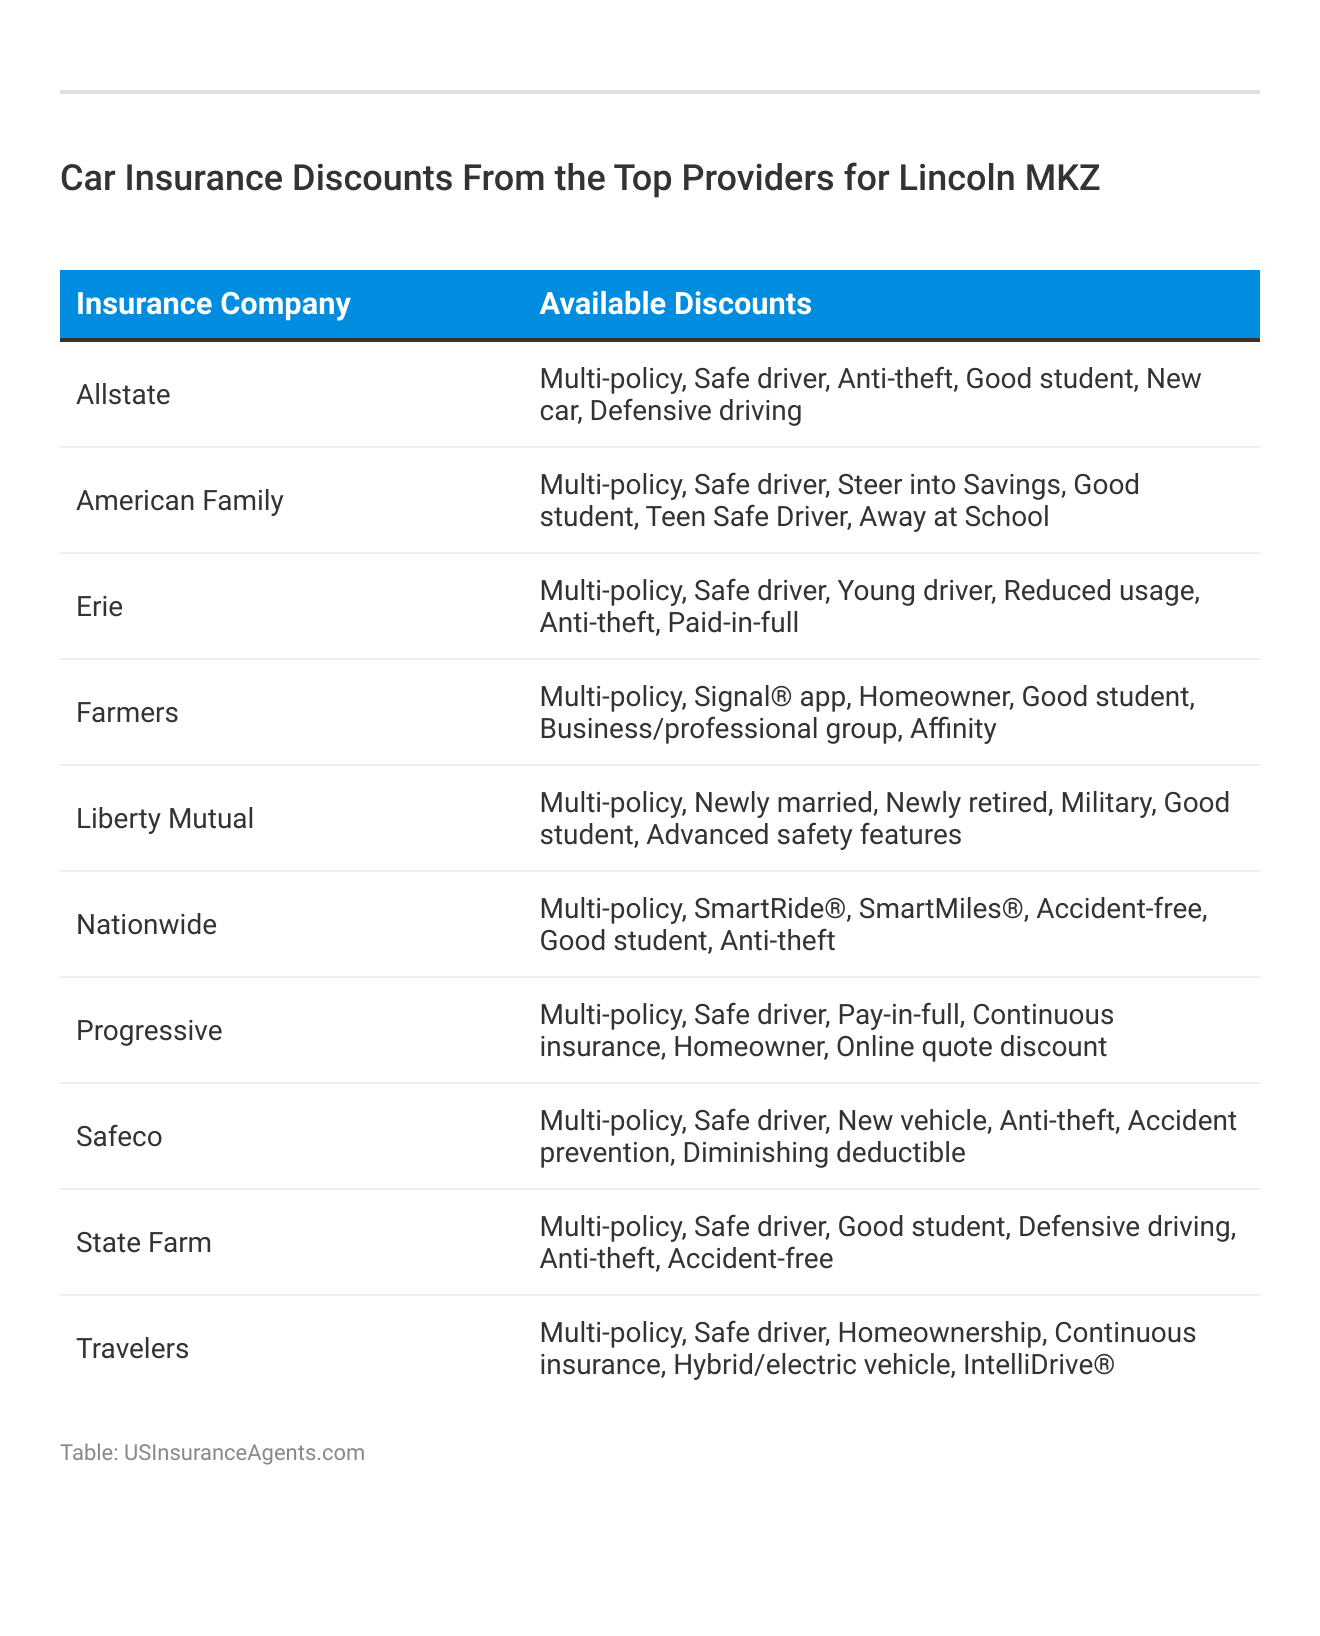 <h3>Car Insurance Discounts From the Top Providers for Lincoln MKZ</h3>